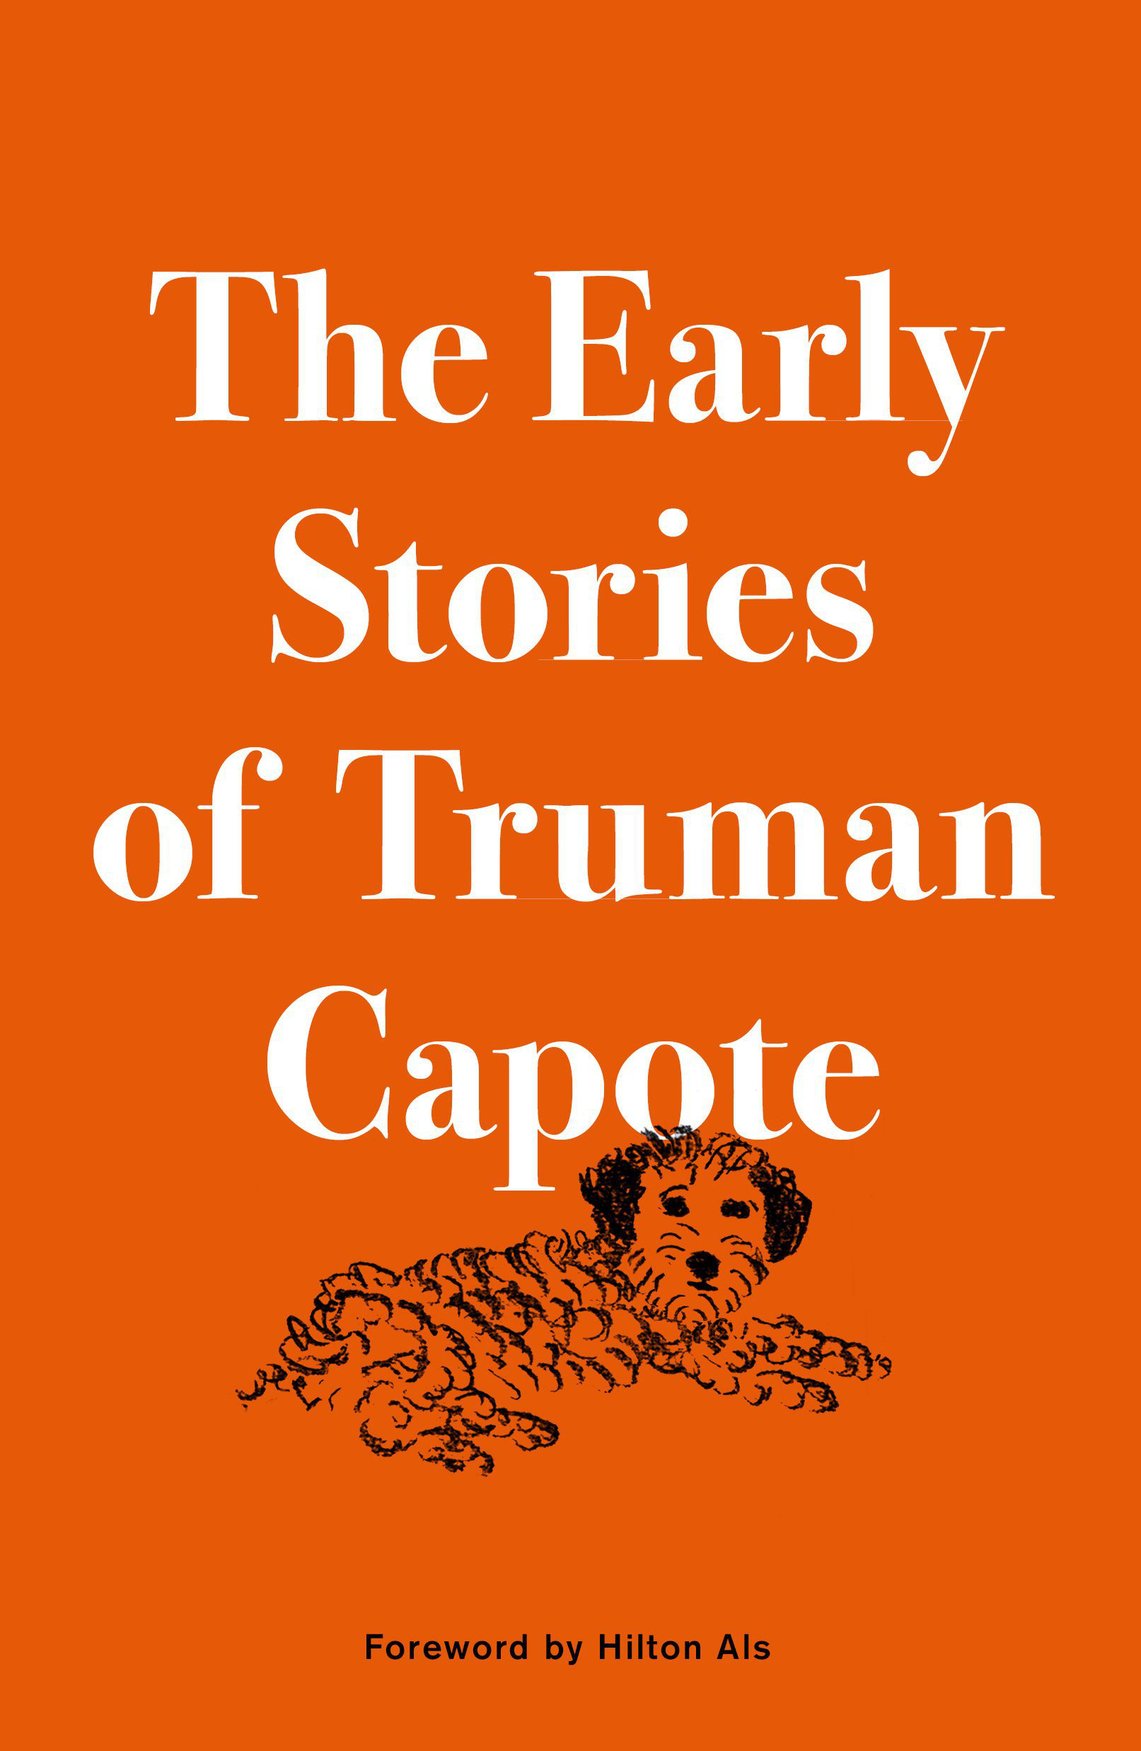 The Early Stories of Truman Capote (2015) by Truman Capote